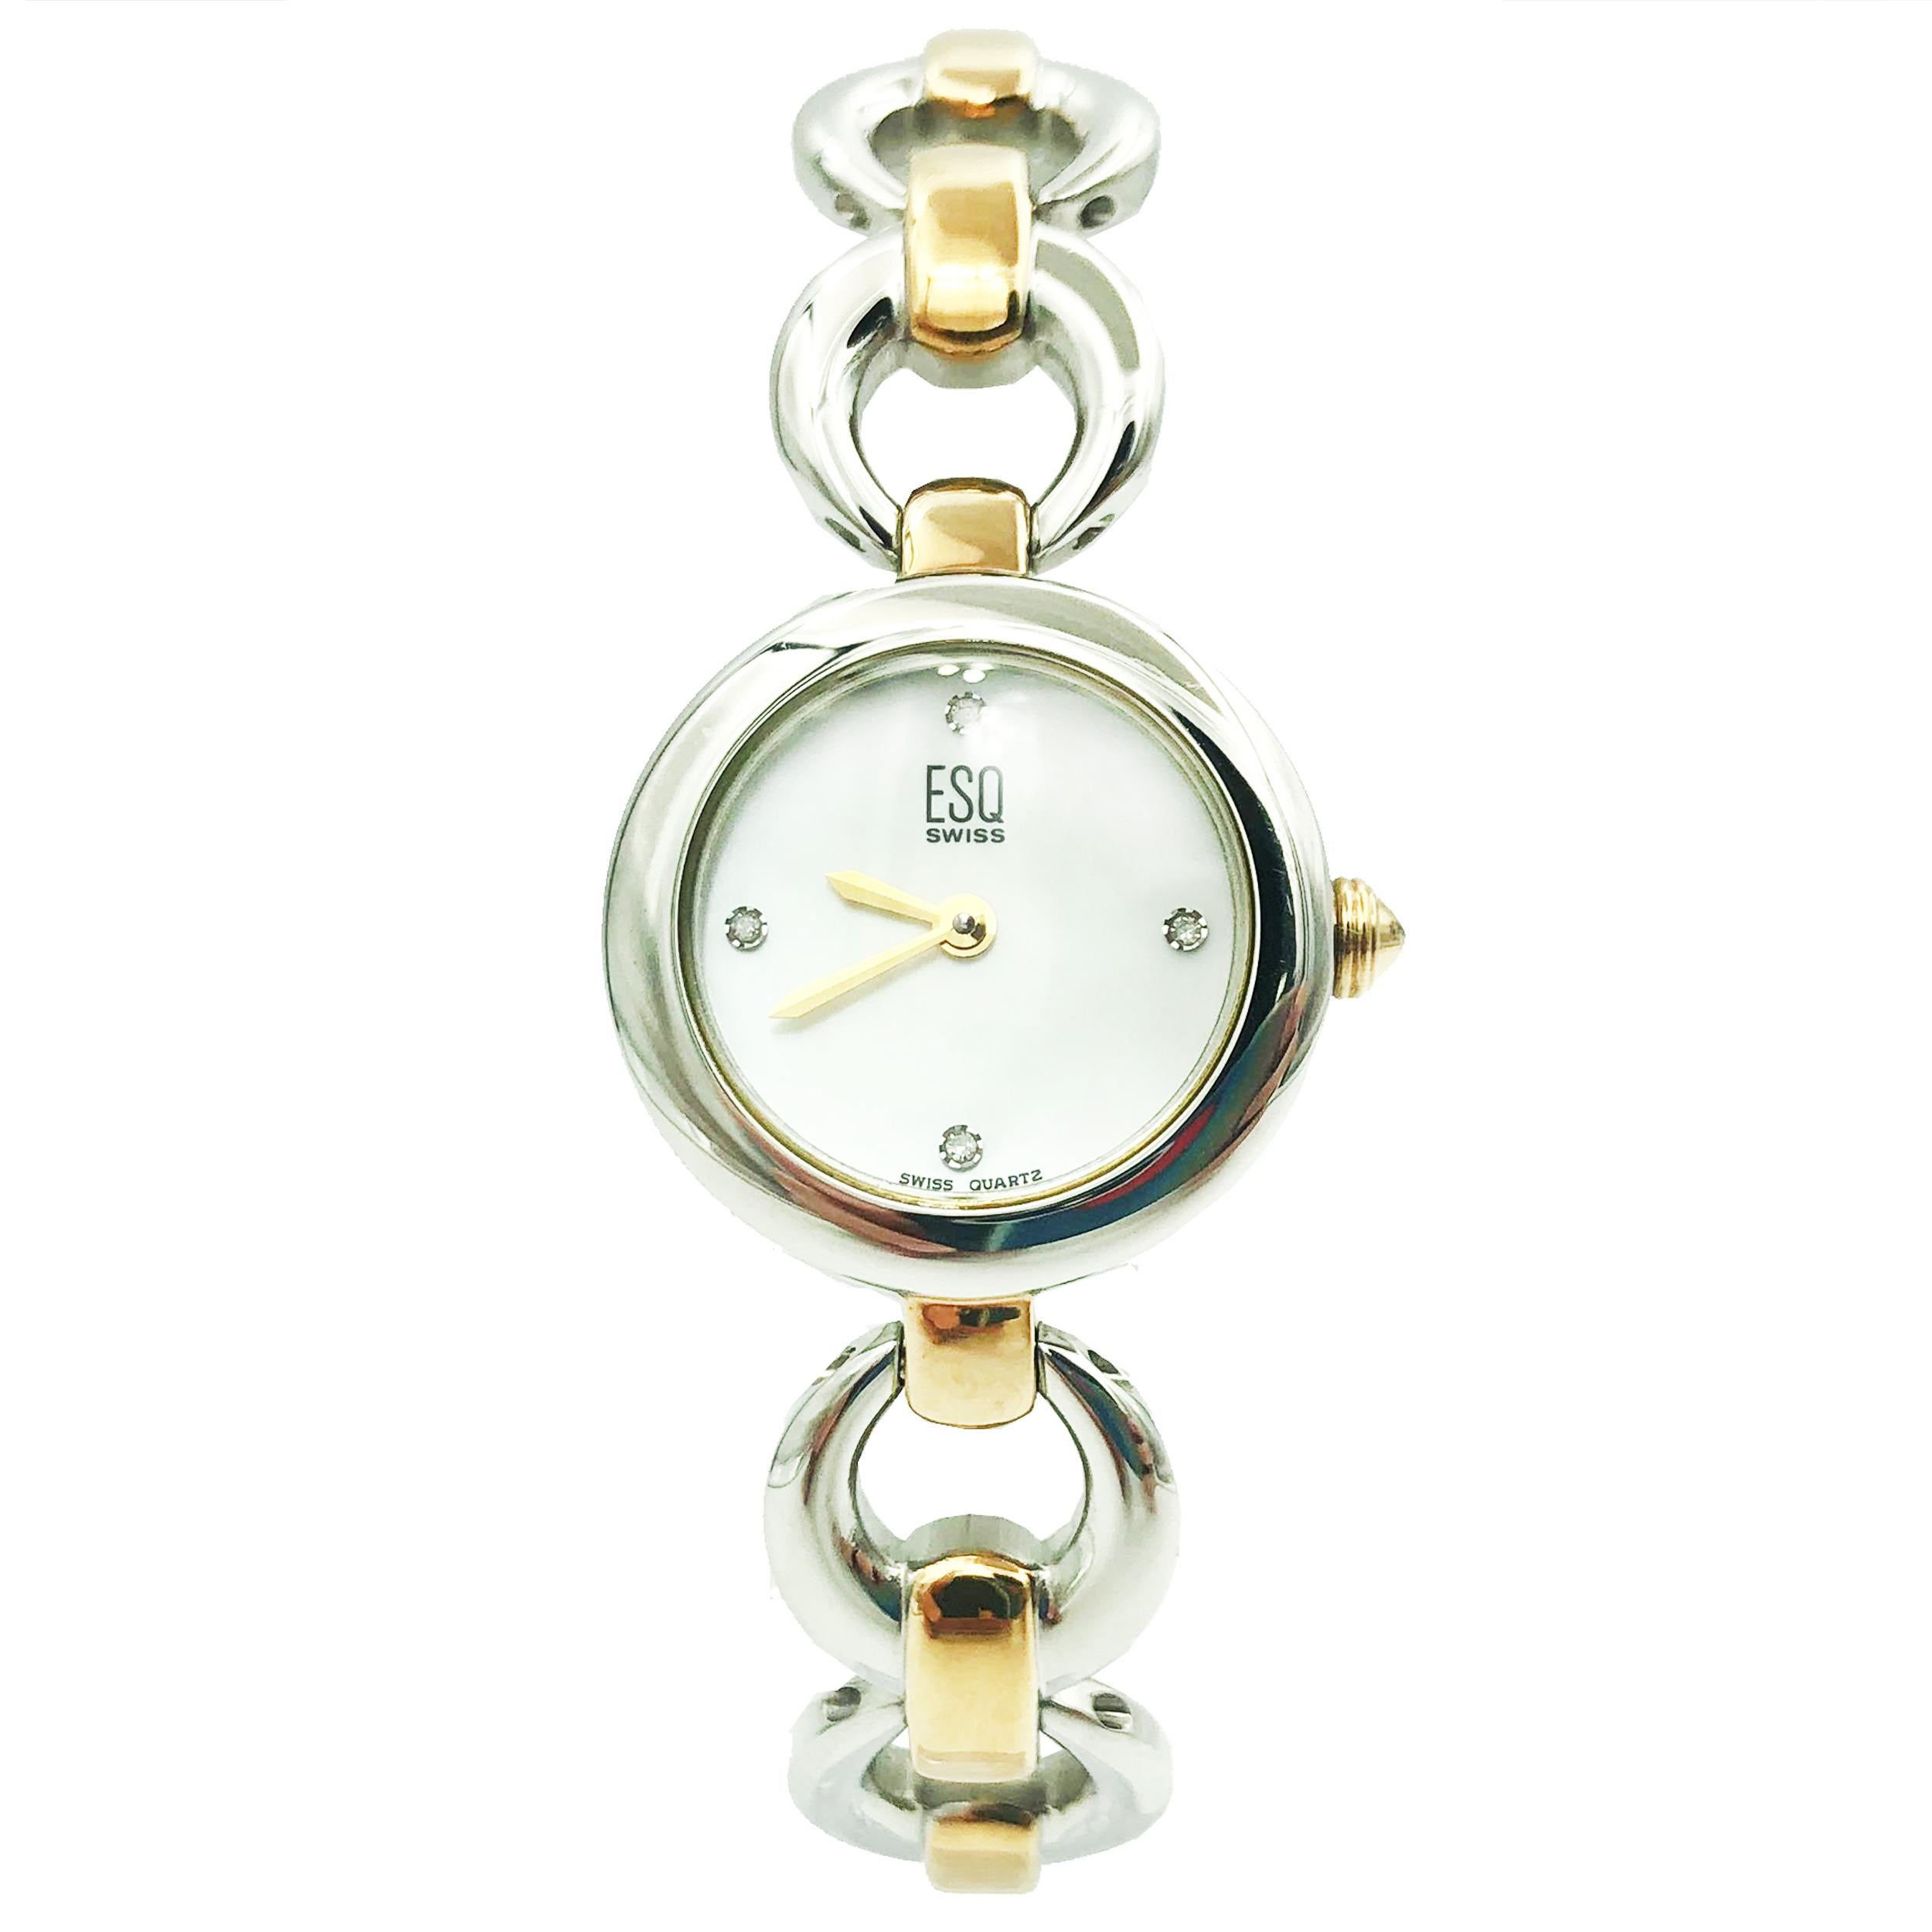 Timepiece has some hairline scratches on gold tone elements.
Brand ESQ
Type Wristwatch
Department Women
Model Number 07101188
Country/Region of Manufacture Switzerland
Style Dress/Formal
Movement Quartz
Band Color Multicolor
Band Material Stainless